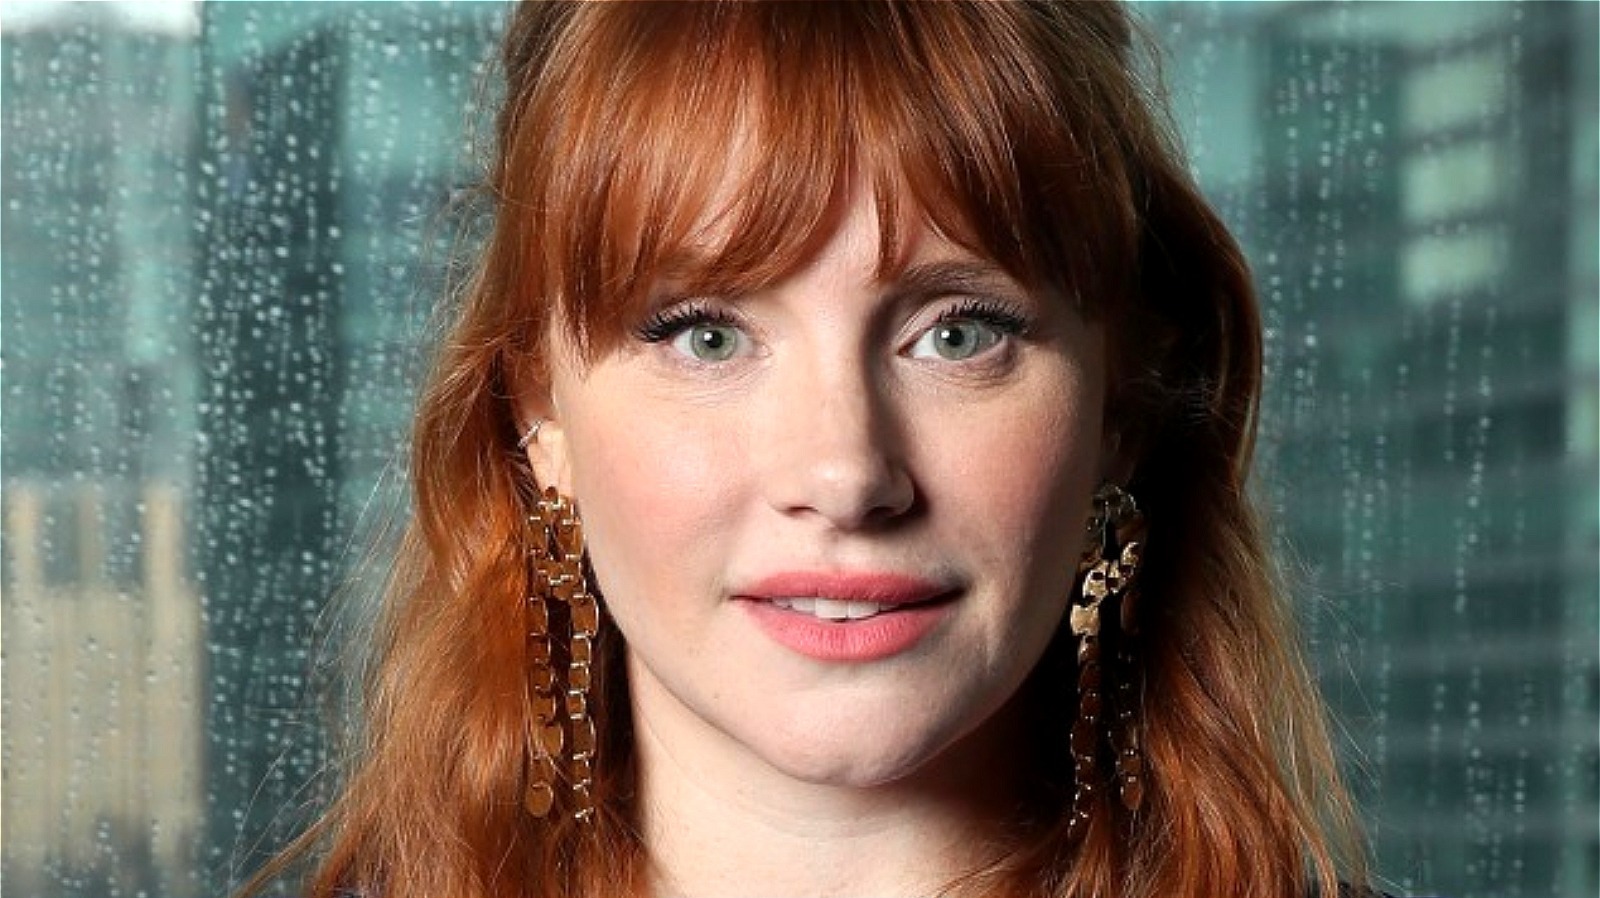 This Look At Bryce Dallas Howard As Spider-Gwen Is Eye-Catching